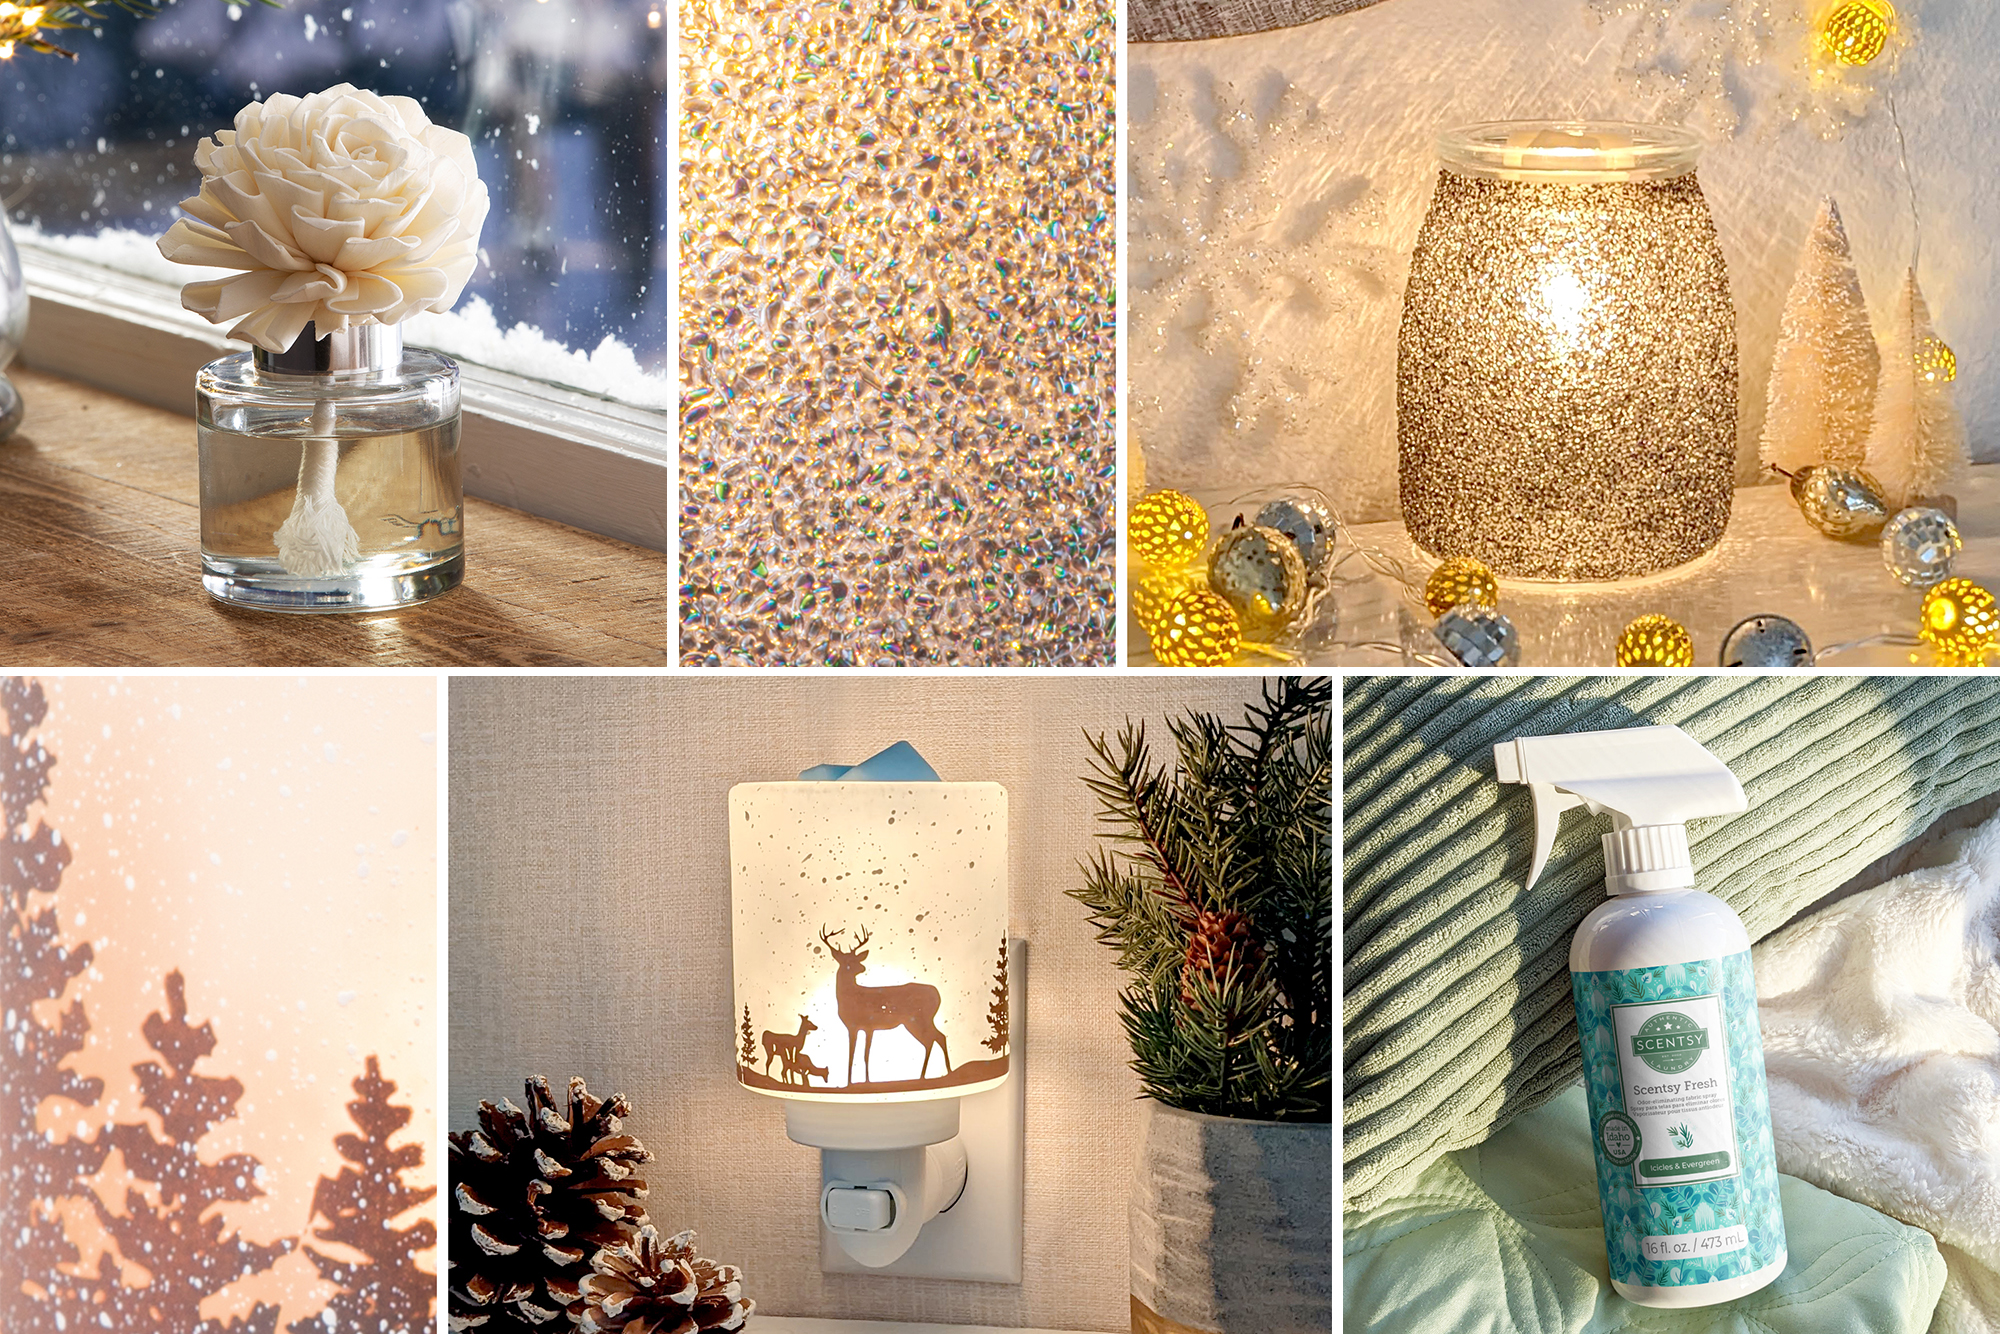 Winter wonderland and seasonal home décor from Scentsy